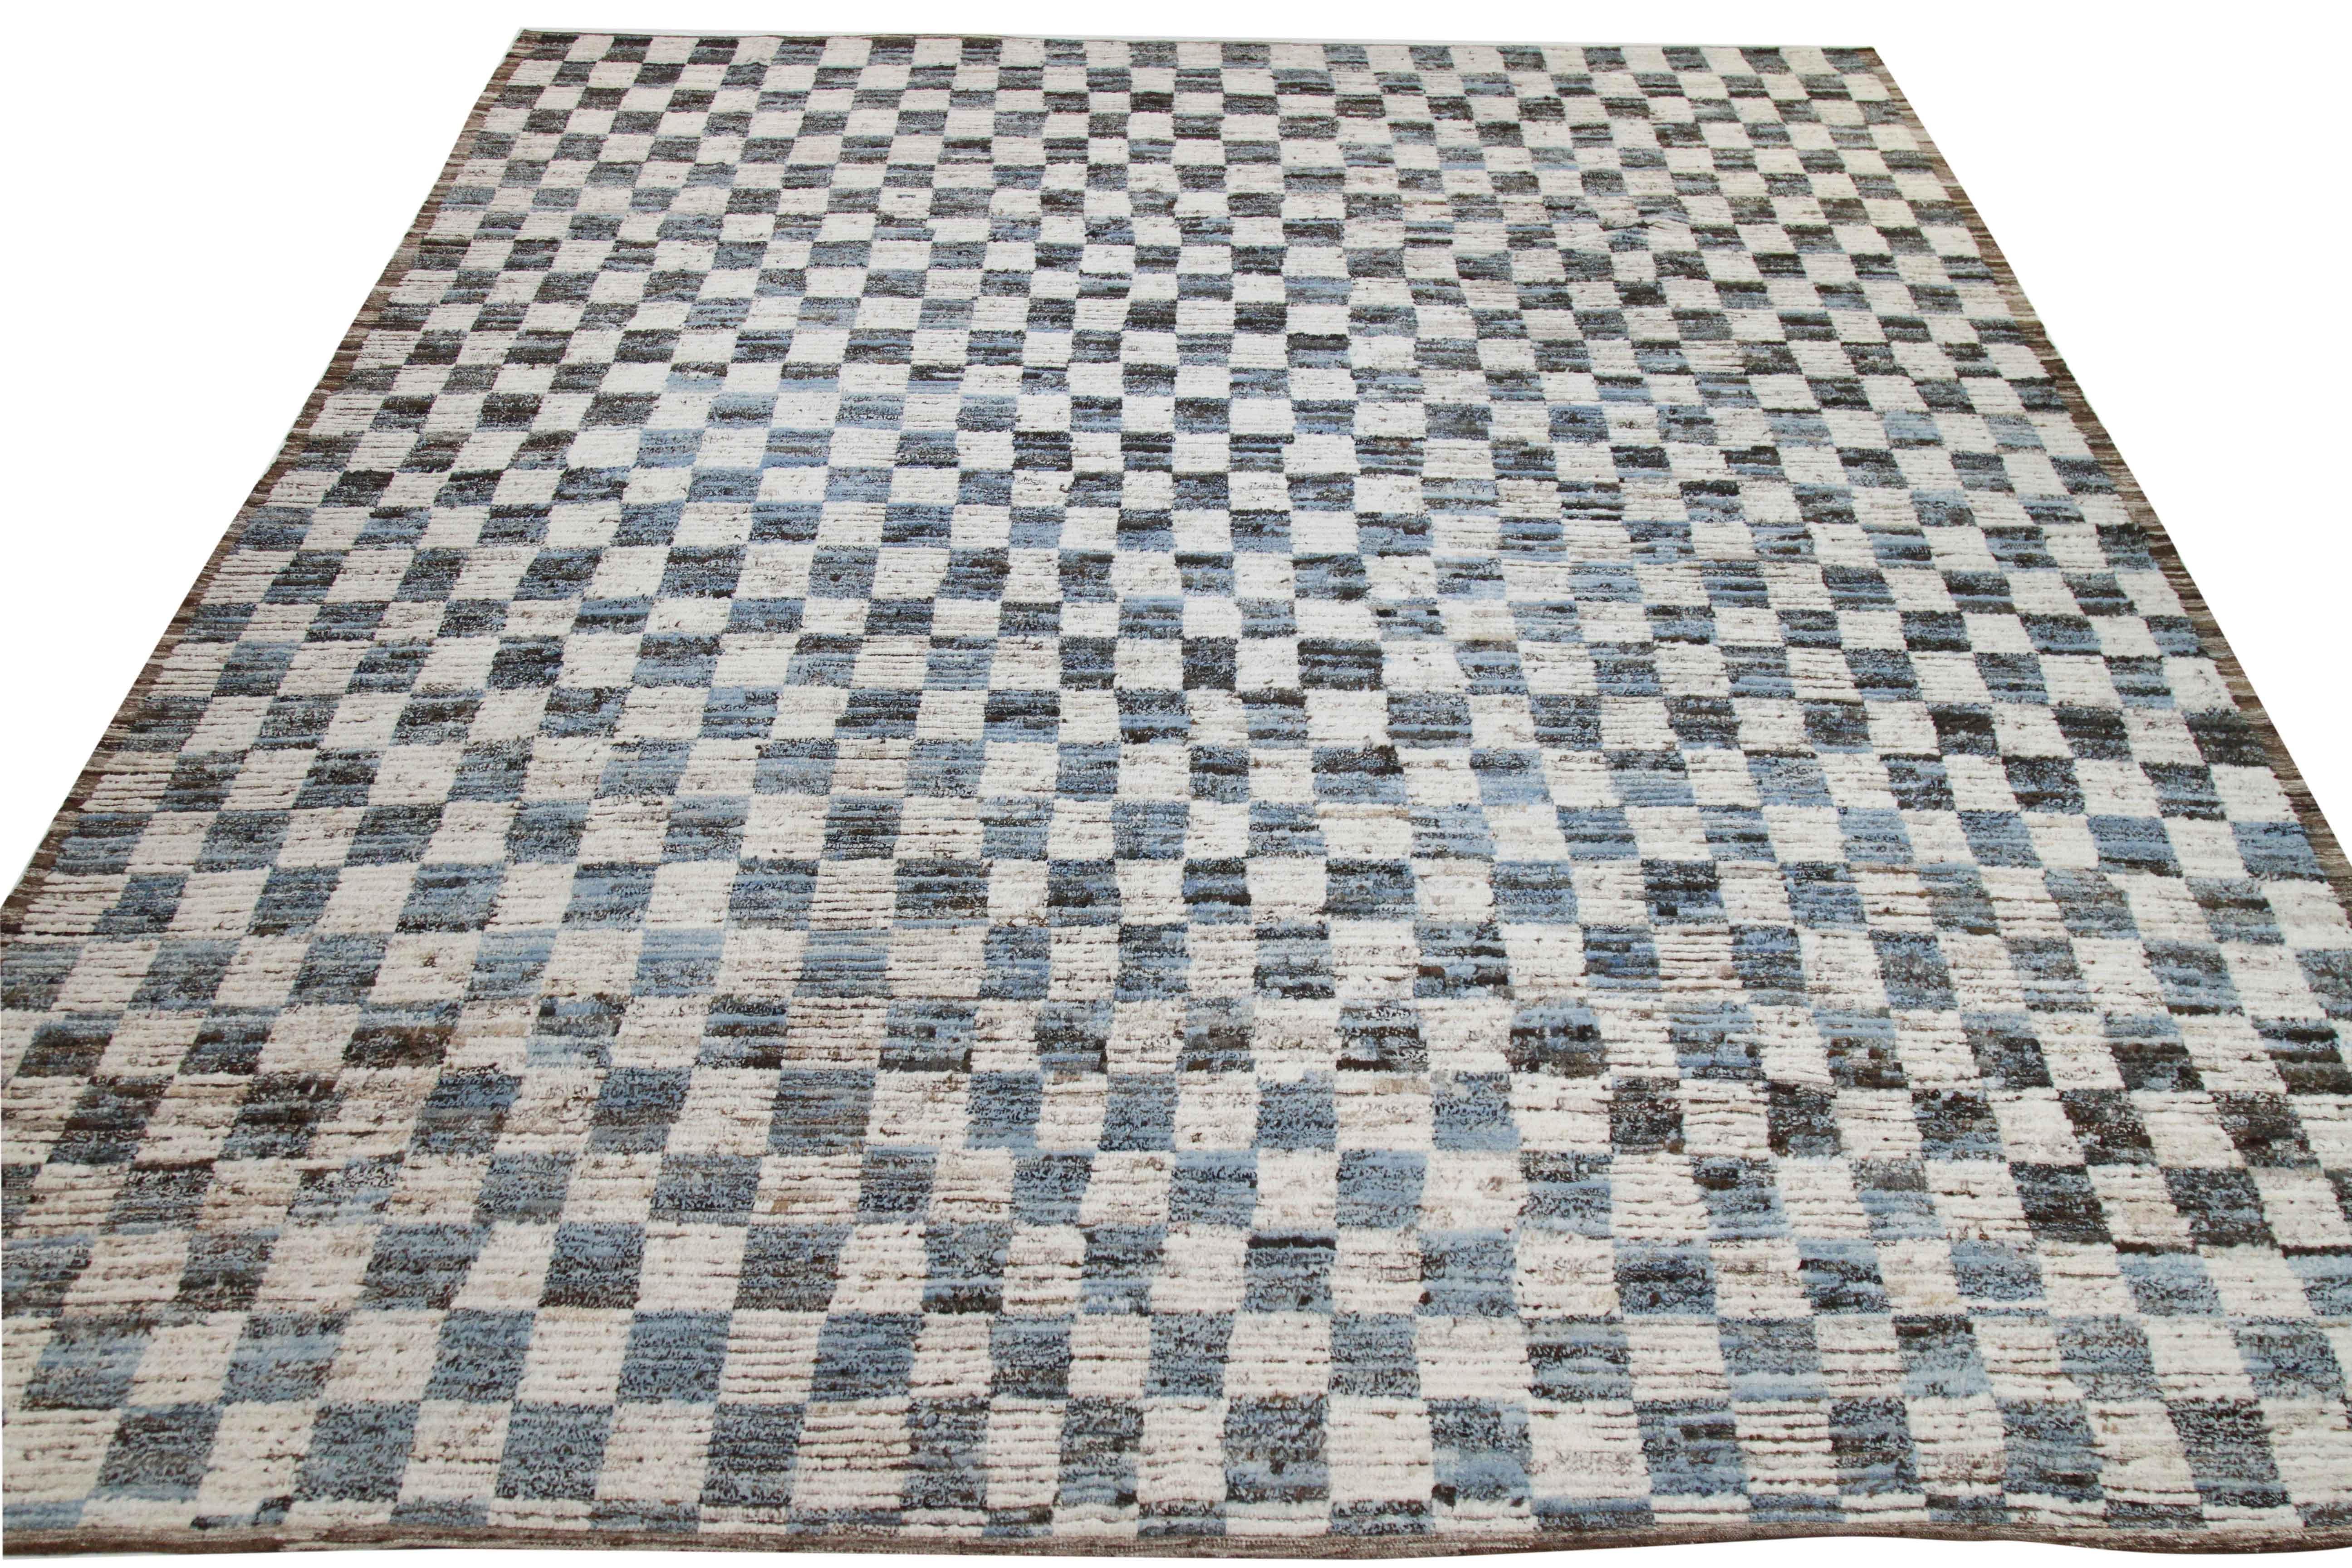 Modern Afghan rug handwoven from the finest sheep’s wool and colored with all-natural vegetable dyes that are safe for humans and pets. It’s a traditional Afghan weaving featuring a Moroccan inspired design highlighted by a brown and blue checkered